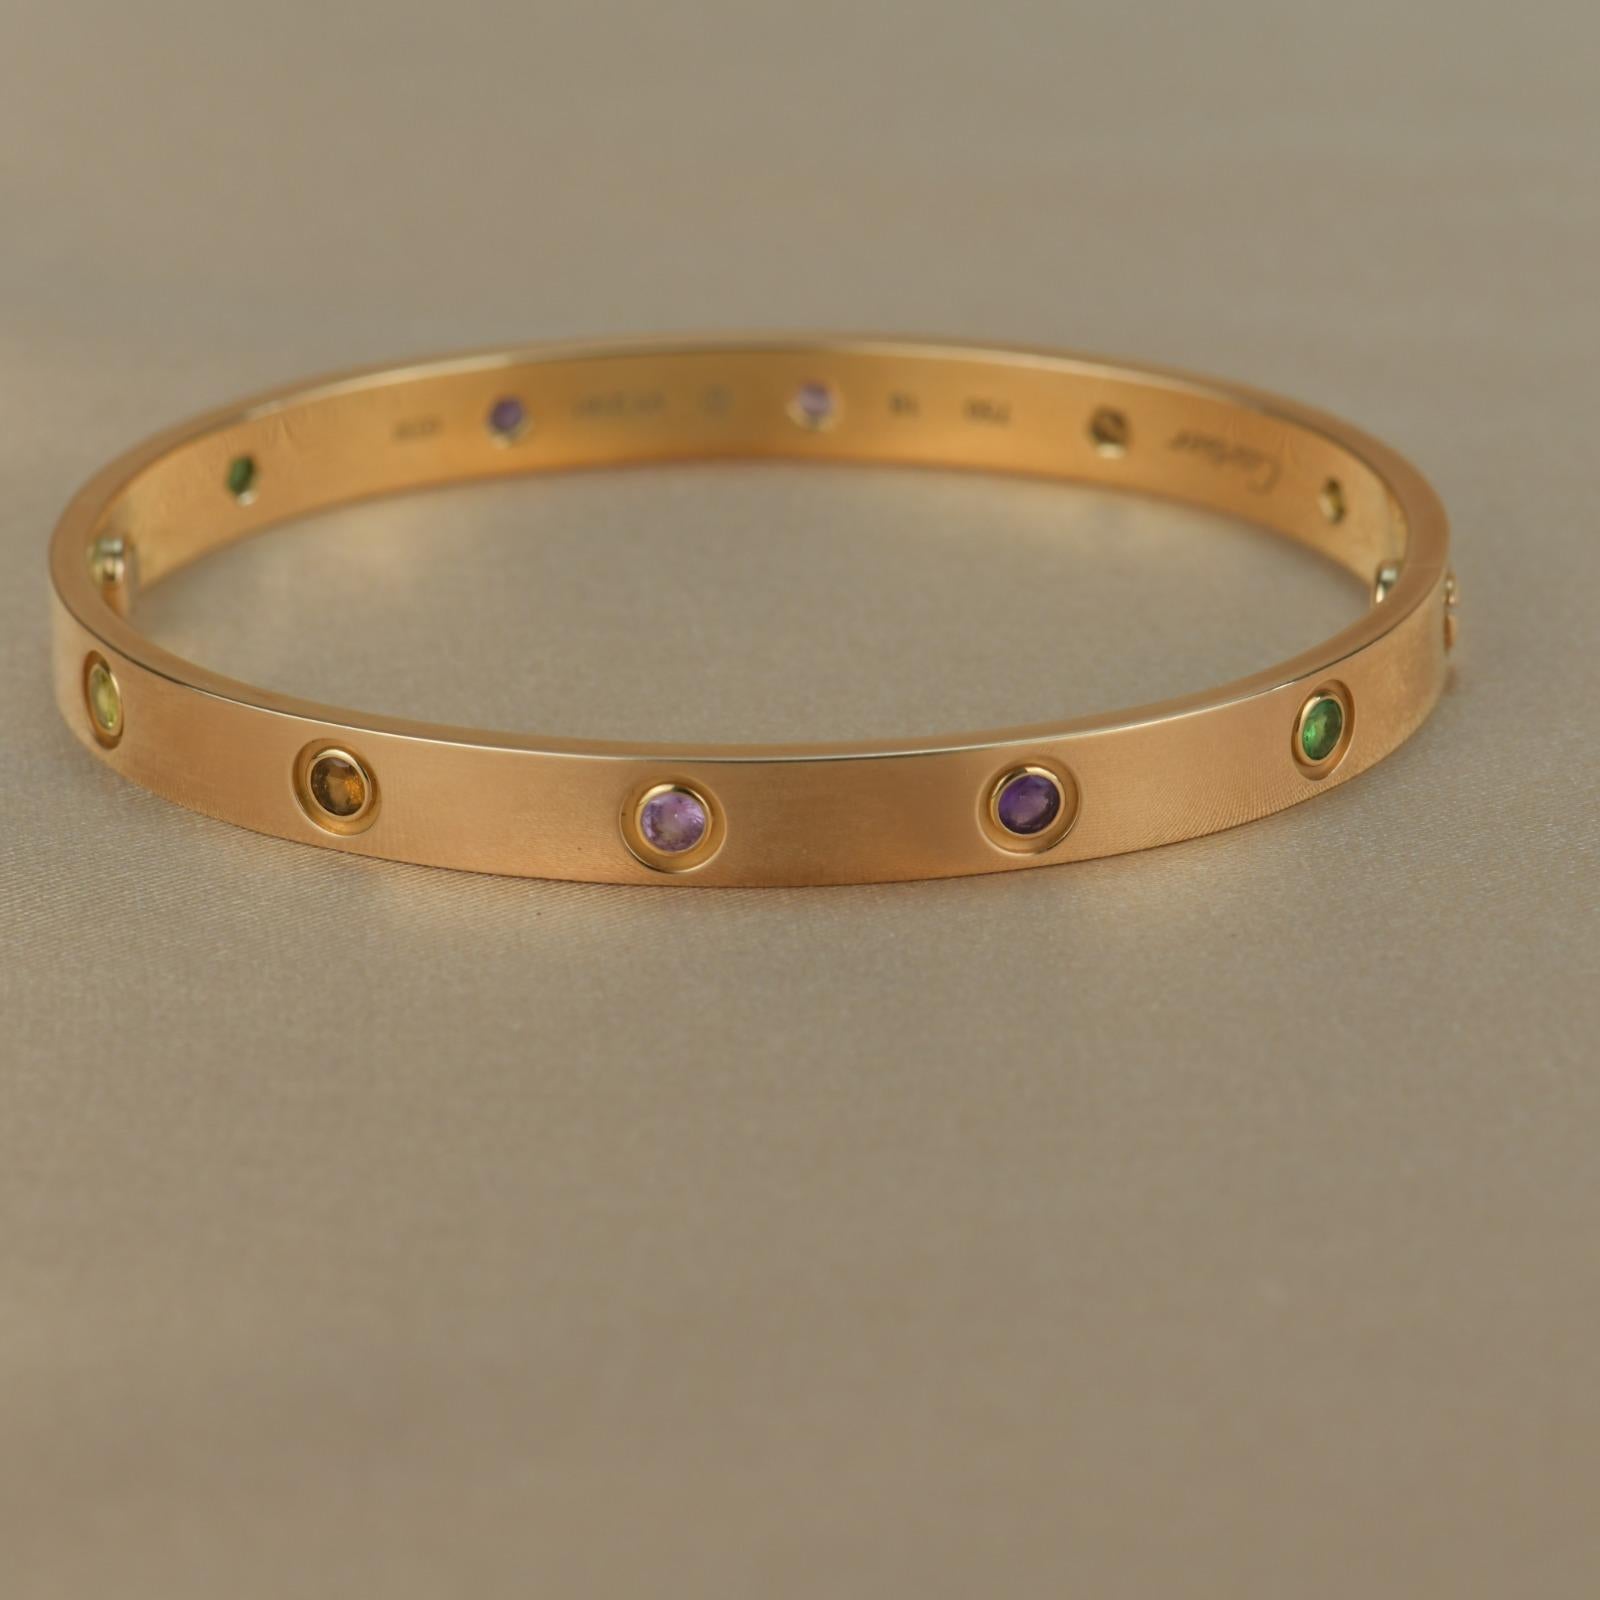 LOVE bracelet, 18K rose gold, set with 2 pink sapphires, 2 yellow sapphires, 2 green garnets, 2 orange garnets, and 2 amethysts. 
Comes with Cartier Box / Authentic card.  Size 18
__________________________________

Dandelion Antiques Code